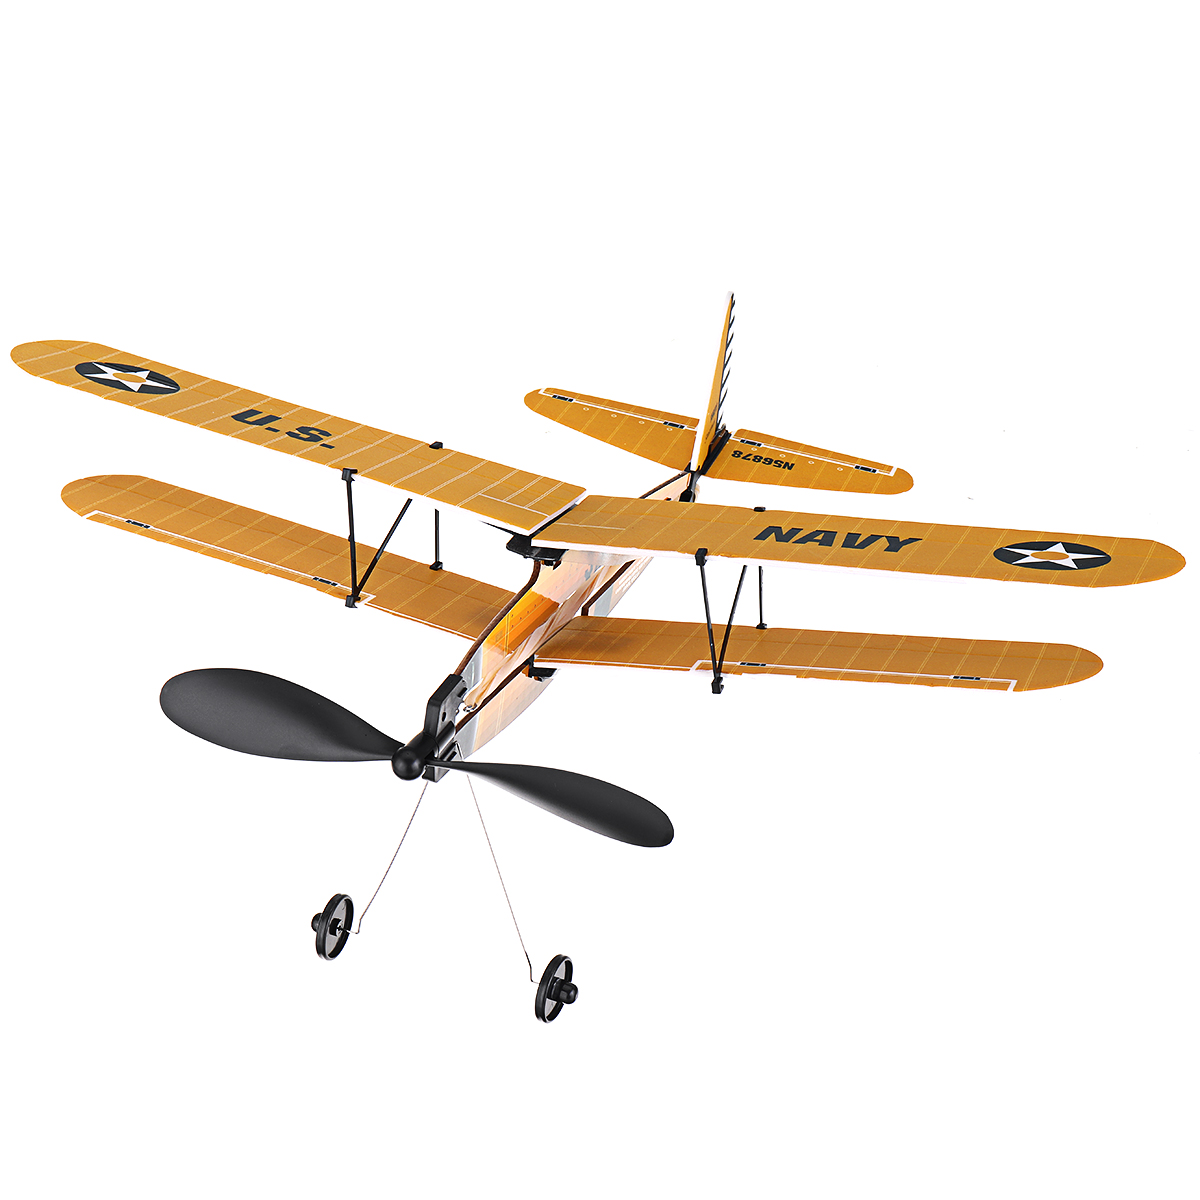 STEM-ZT-Model-18-Inches-STEARMAN-Rubber-Band-Powered-Aircraft-Model-Plane-Toy-1441112-6